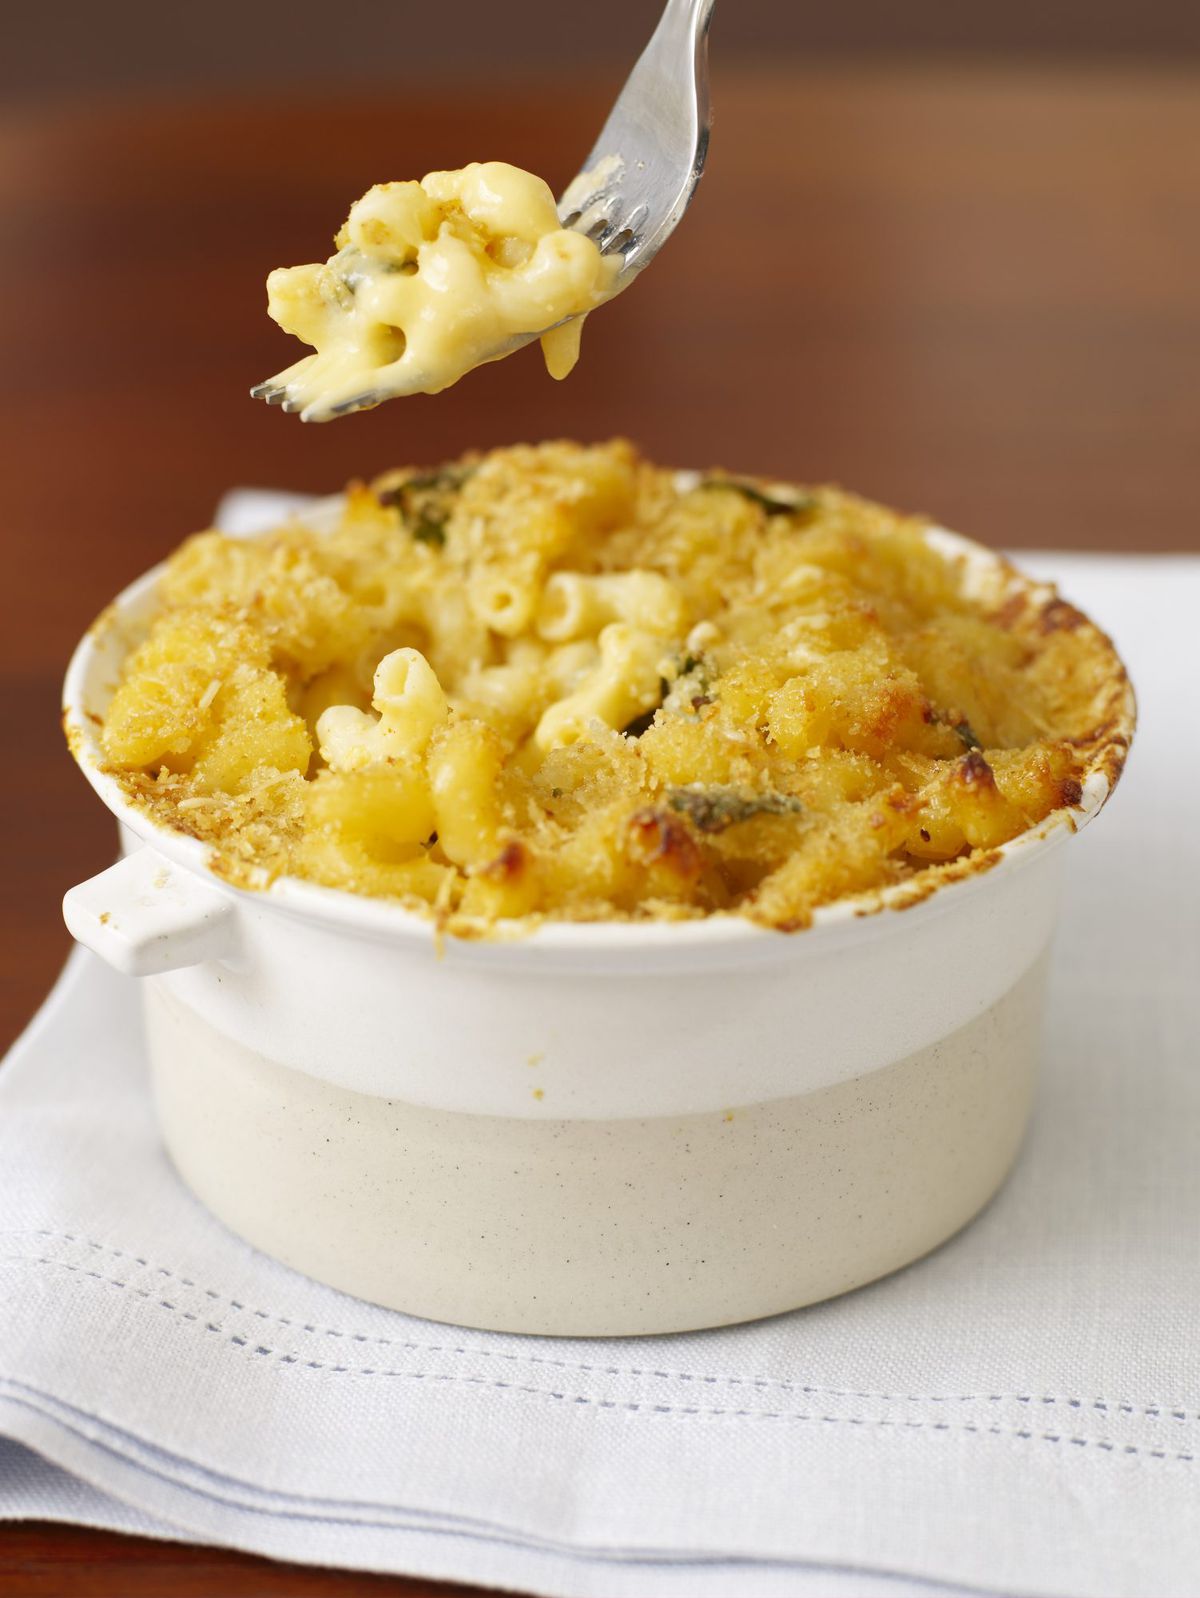 skip mac and cheese in favor of a healthier dish